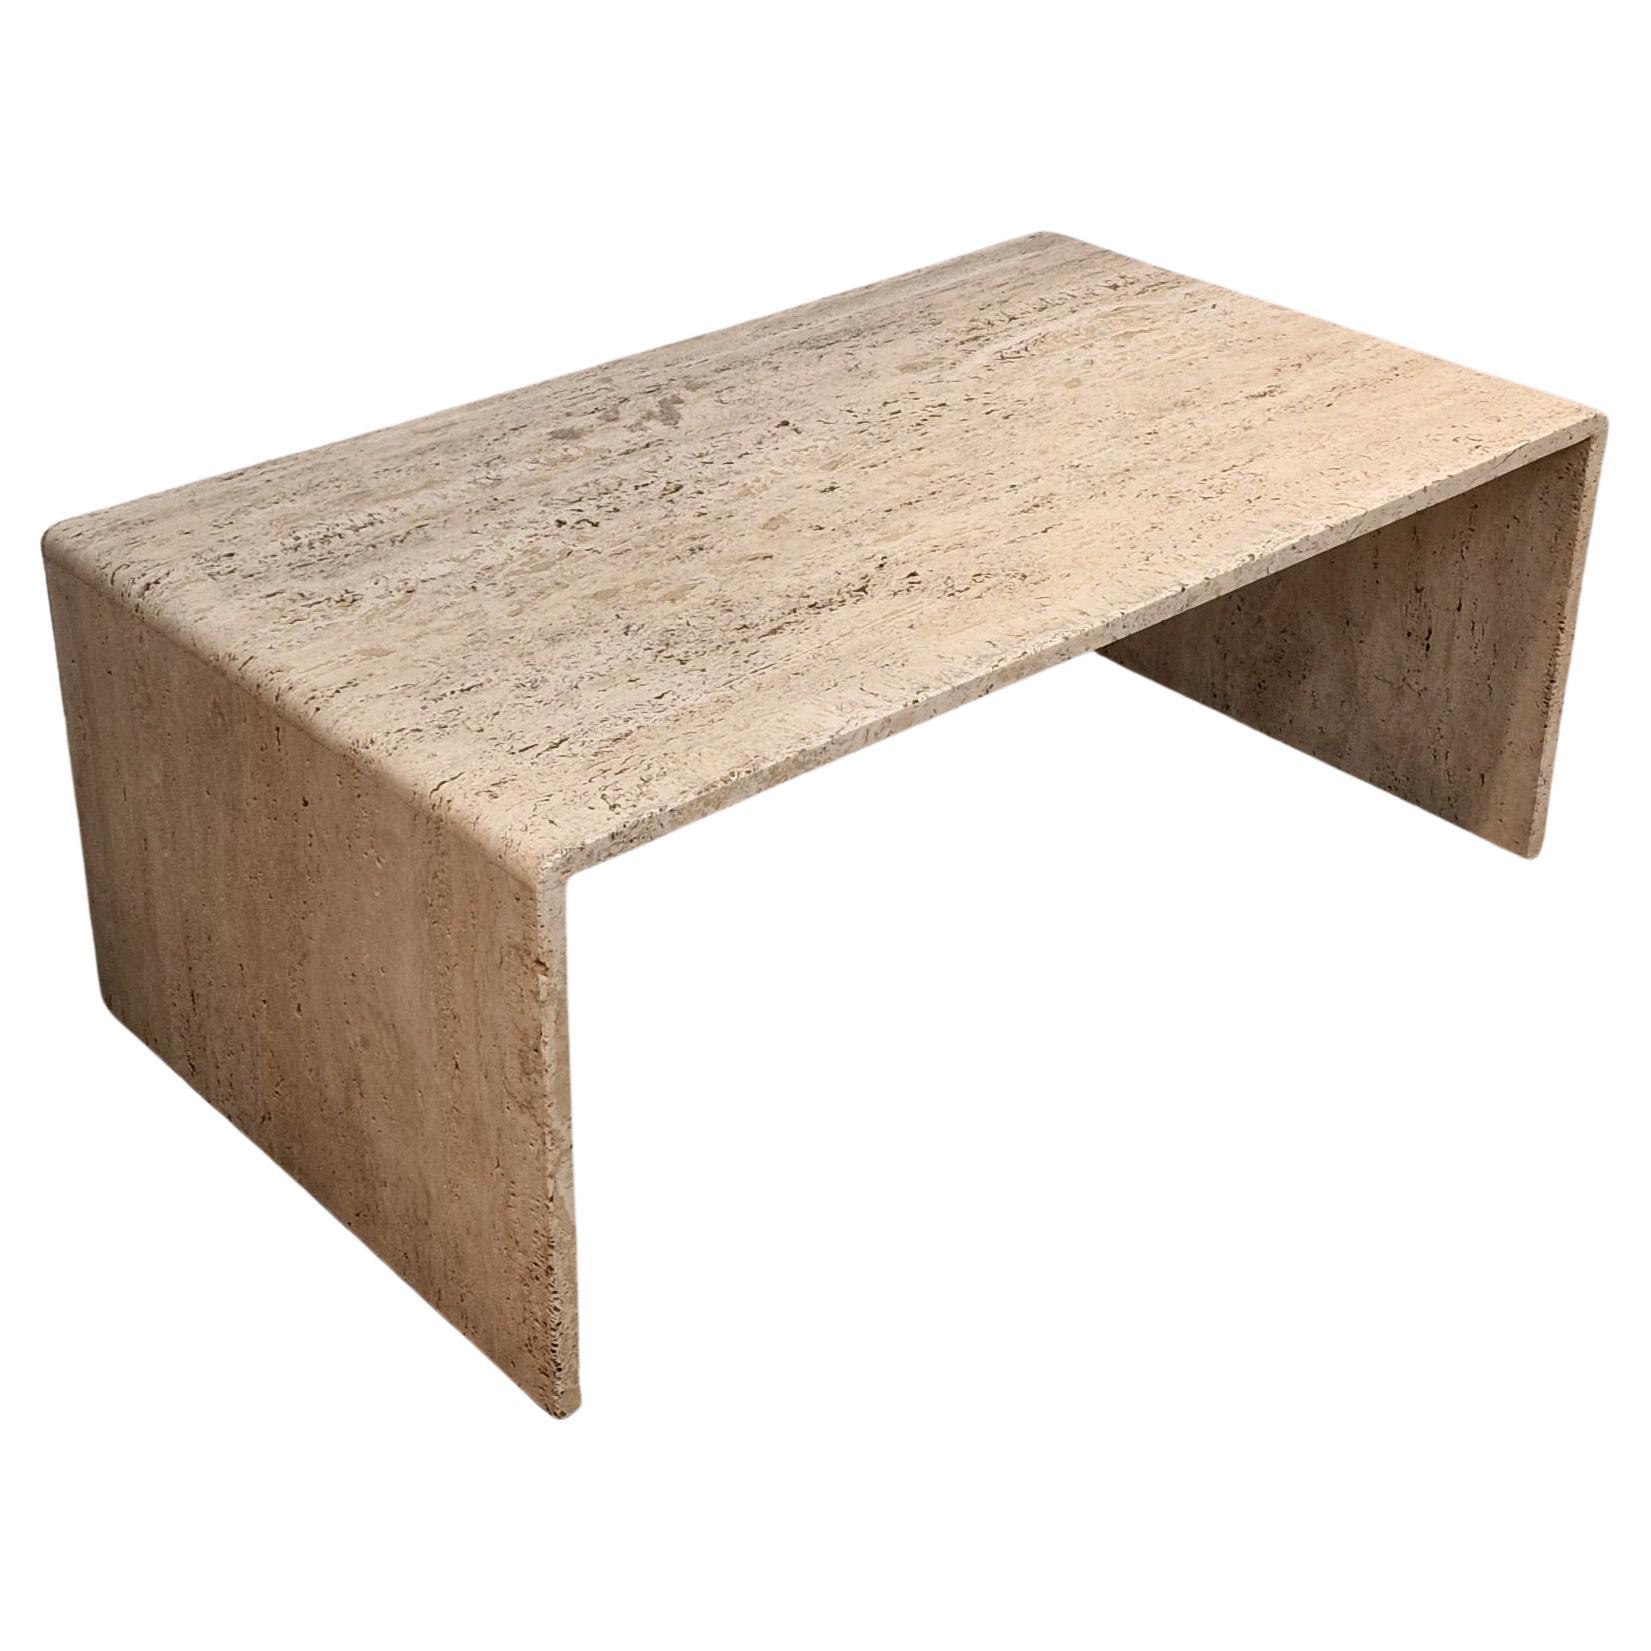 Rough Travertine Coffee Table by Up & Up, Italy